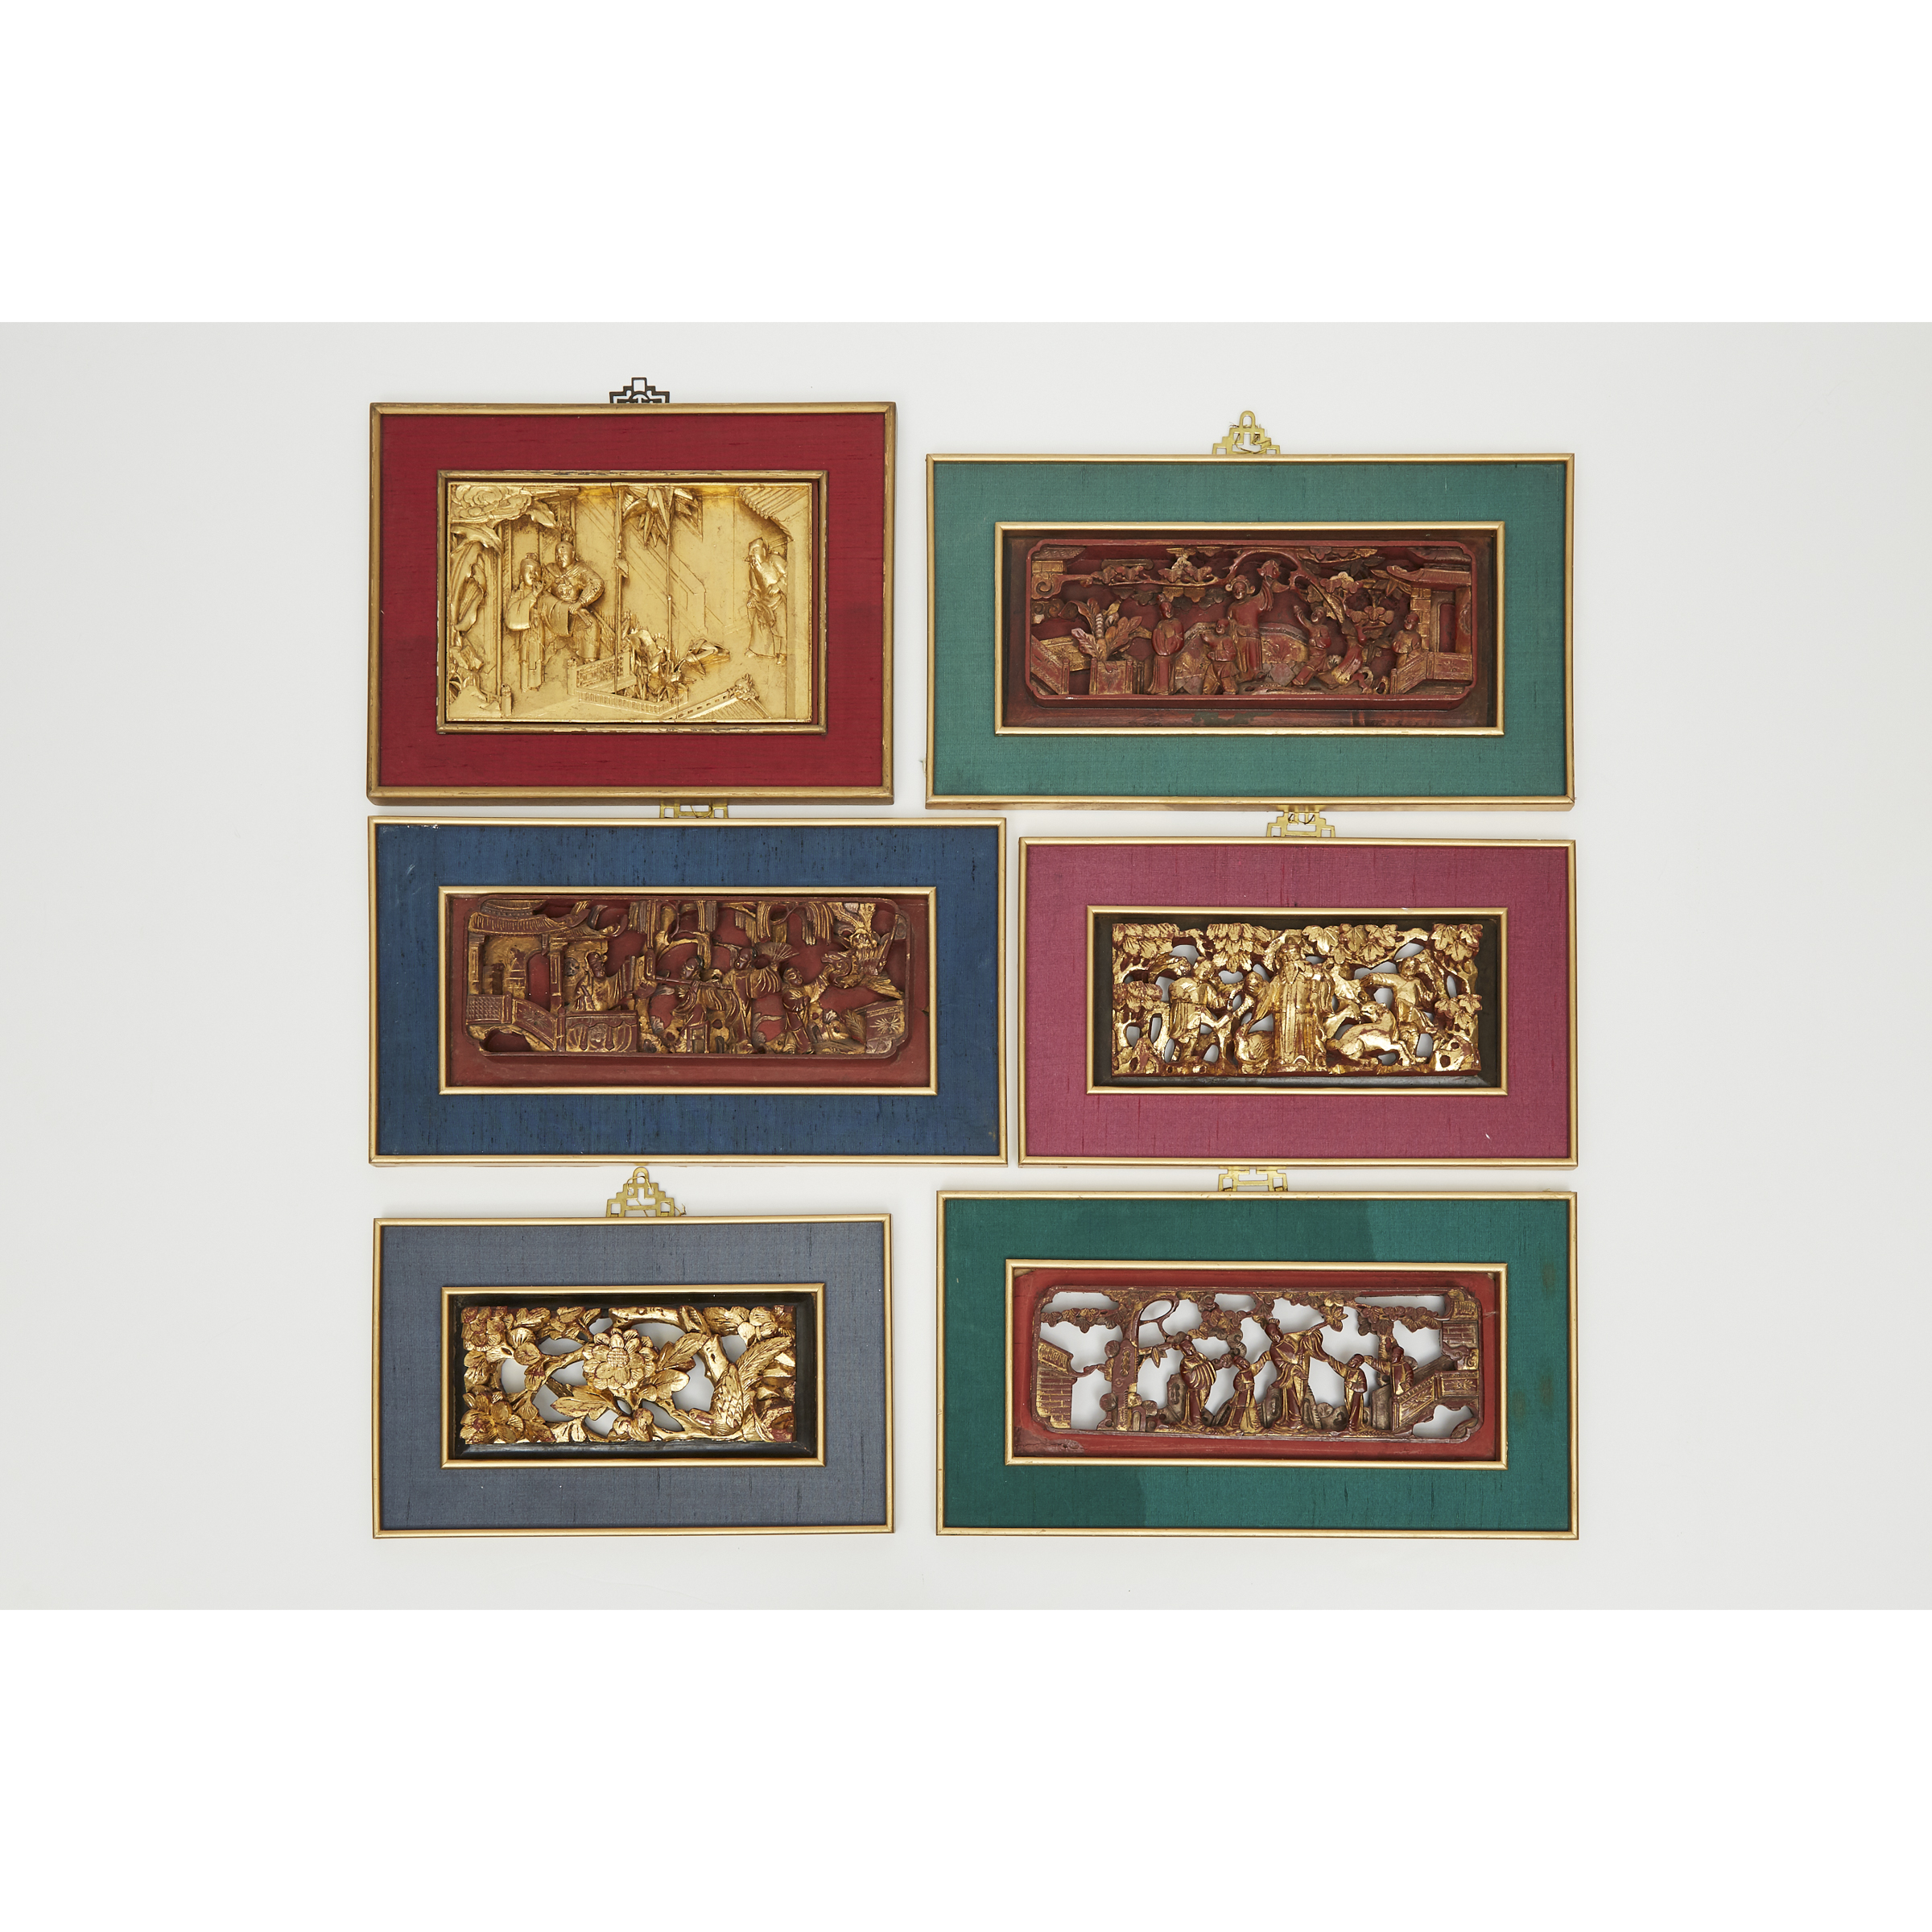 A Set of Six Framed Chinese Gilt Lacquer Temple Panels, 19th Century